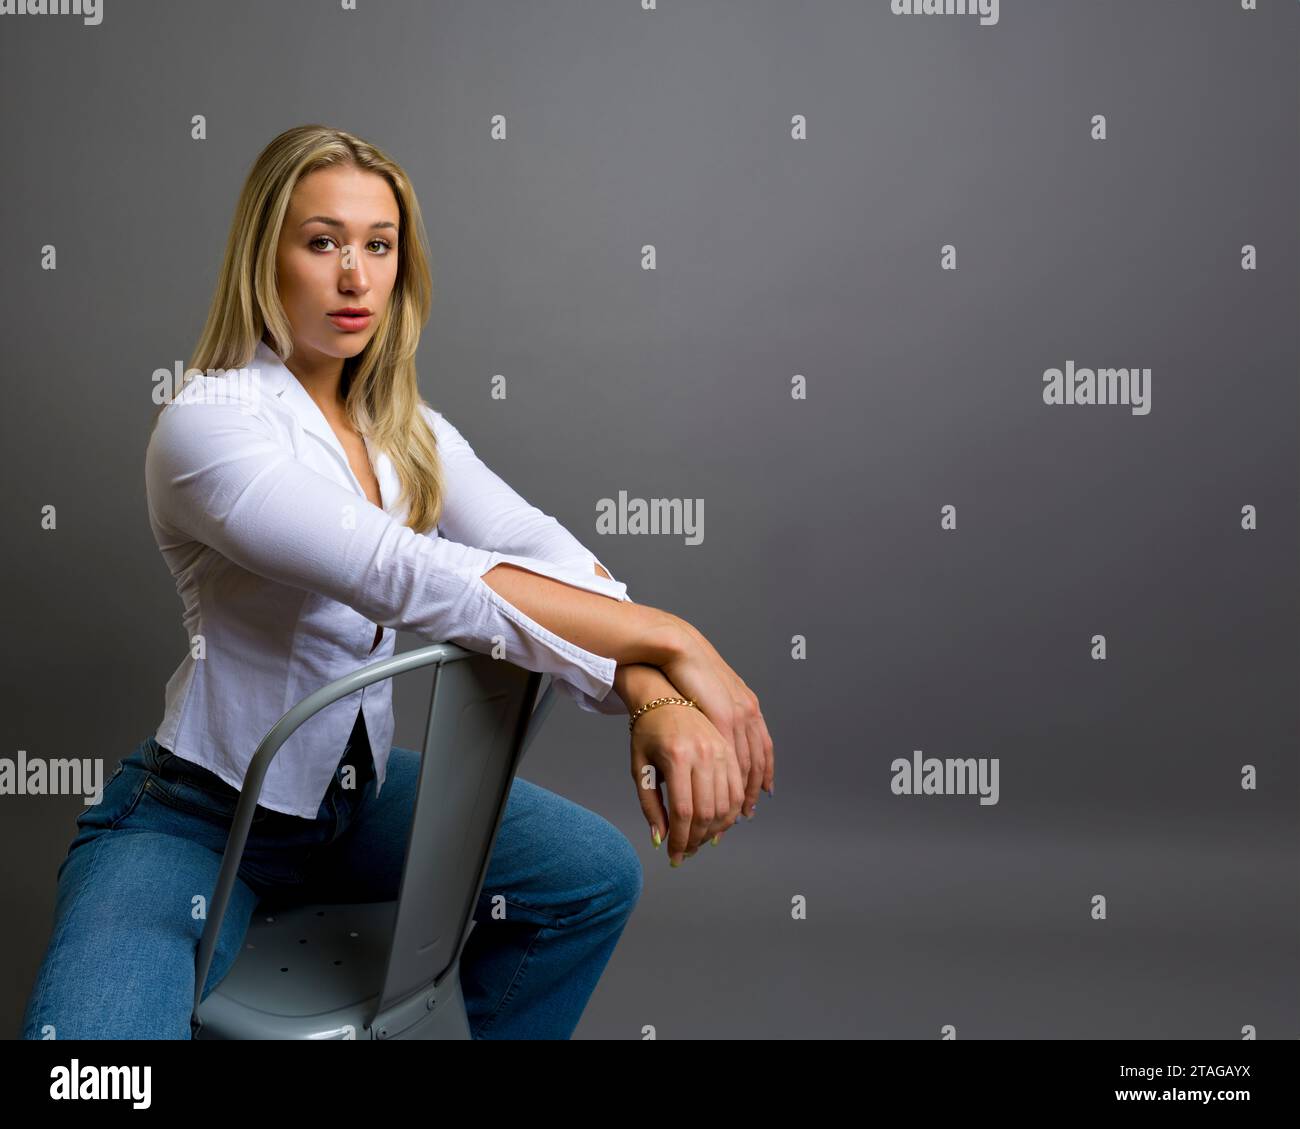 Brawny Body Builder Beautiful Young Woman Thoughtful Expression Seated Facing Camera Grey Gray Background Copy Space Stock Photo